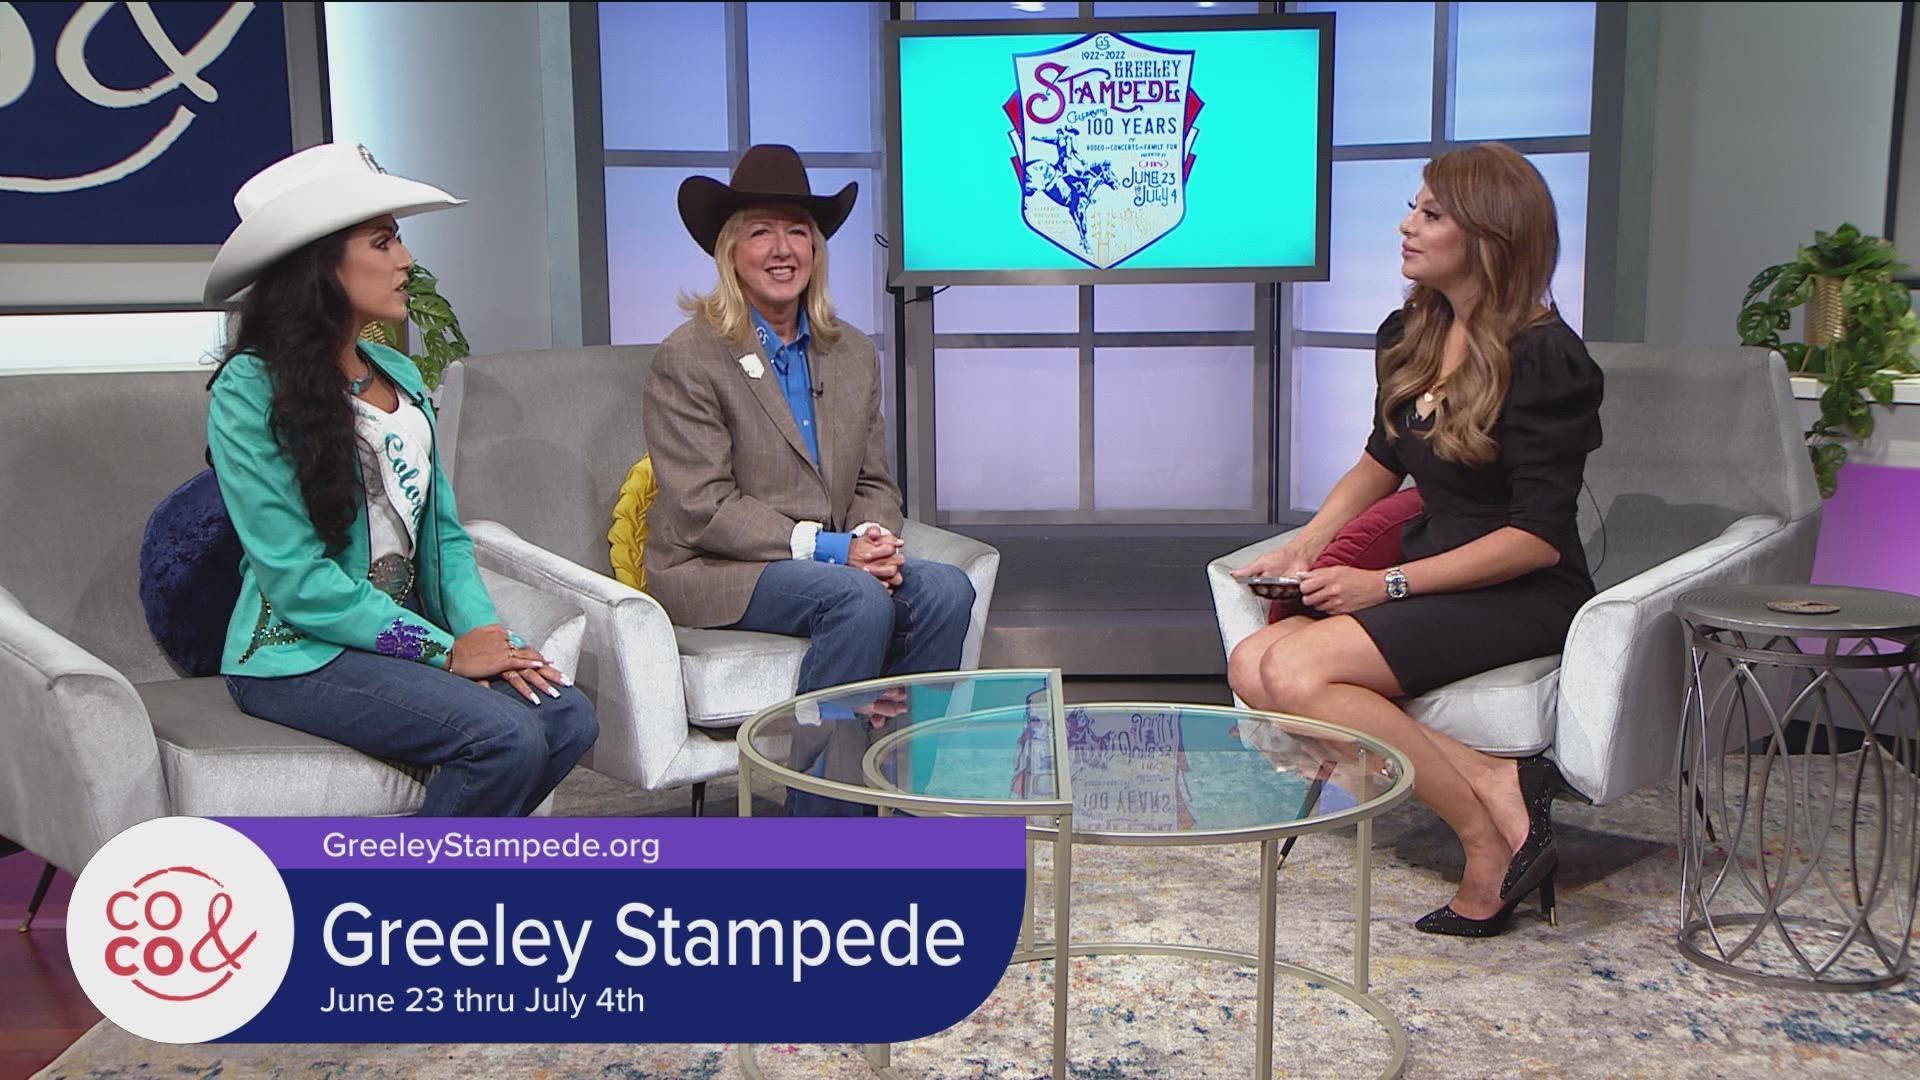 Greeley Stampede takes place June 23rd through July 4th! Get a list of events and get your tickets at GreeleyStampede.org.